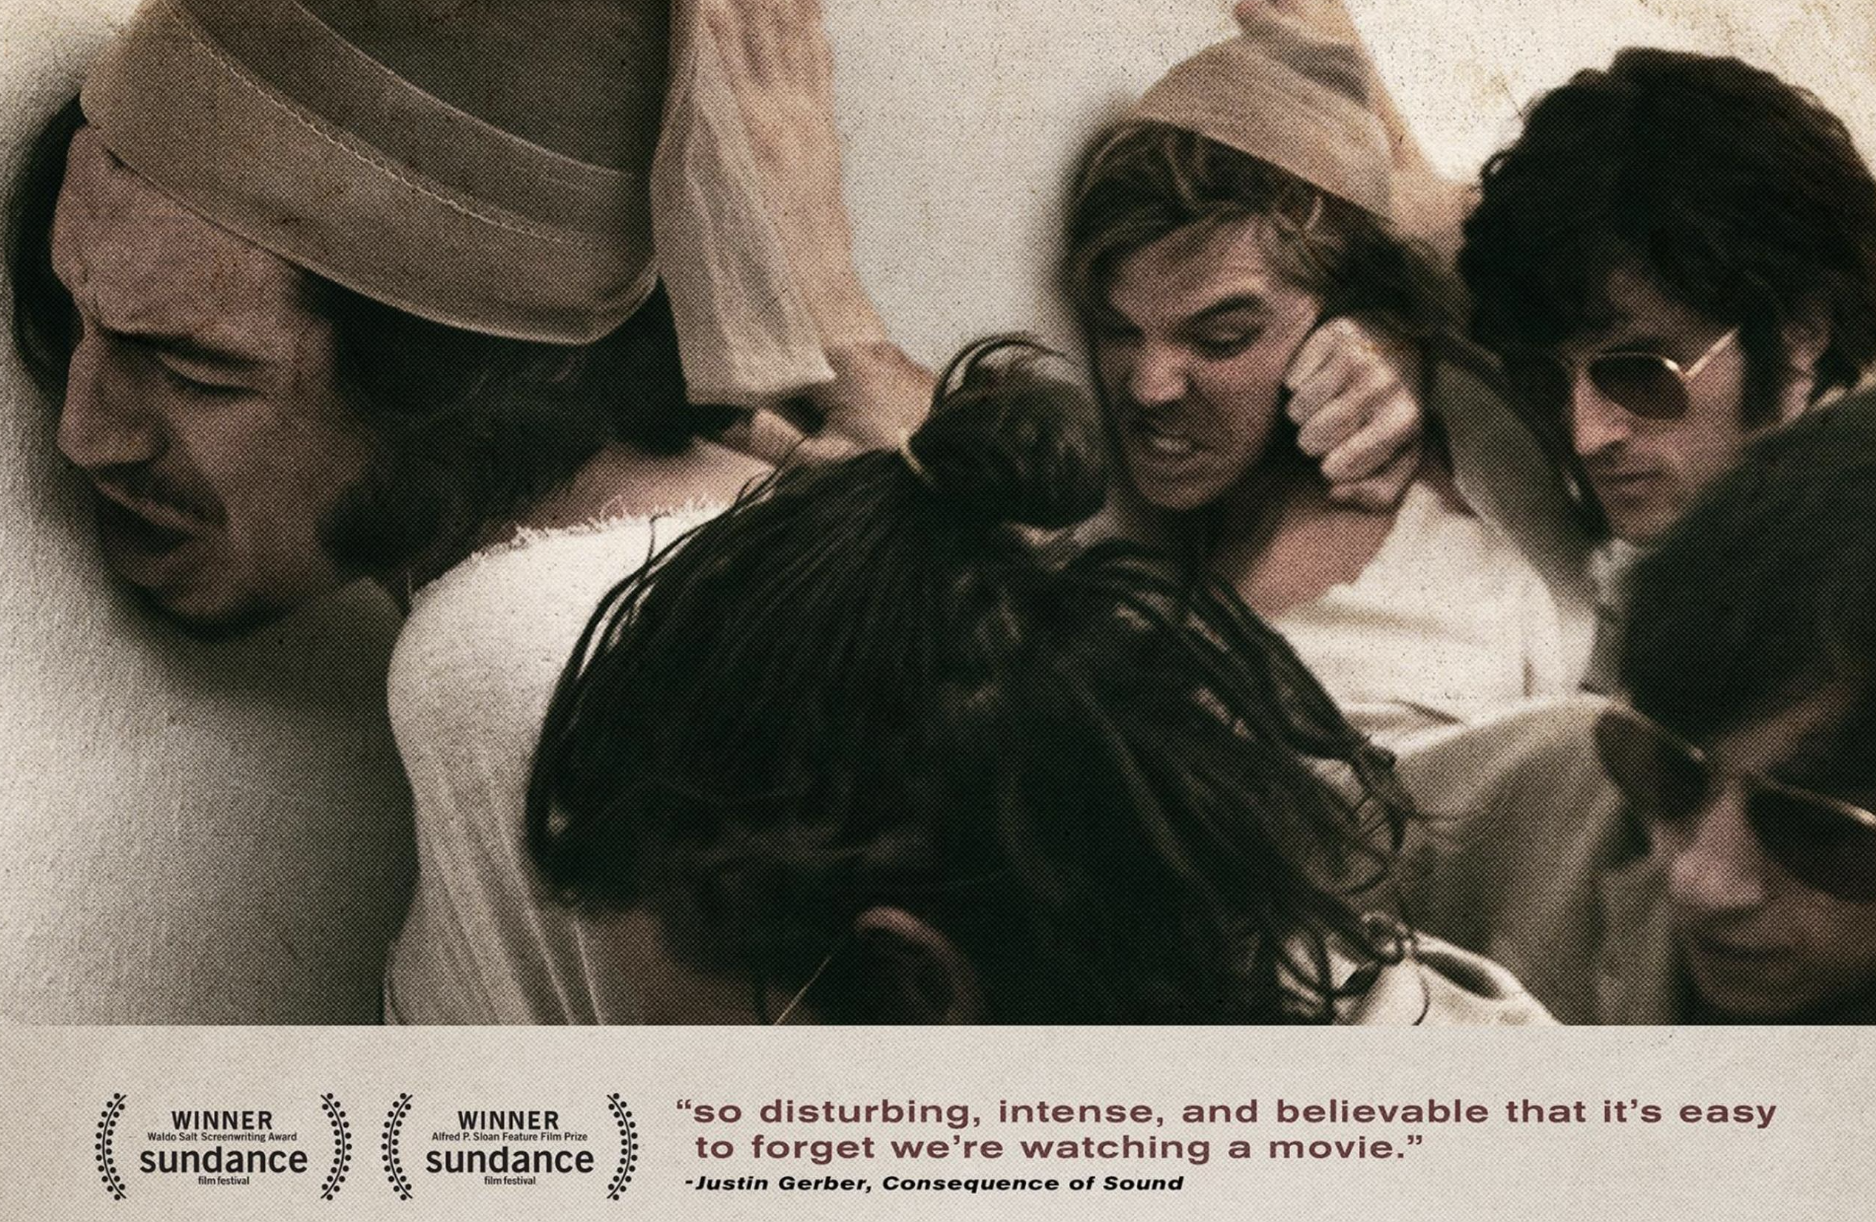 Free Screening: The Stanford Prison Experiment